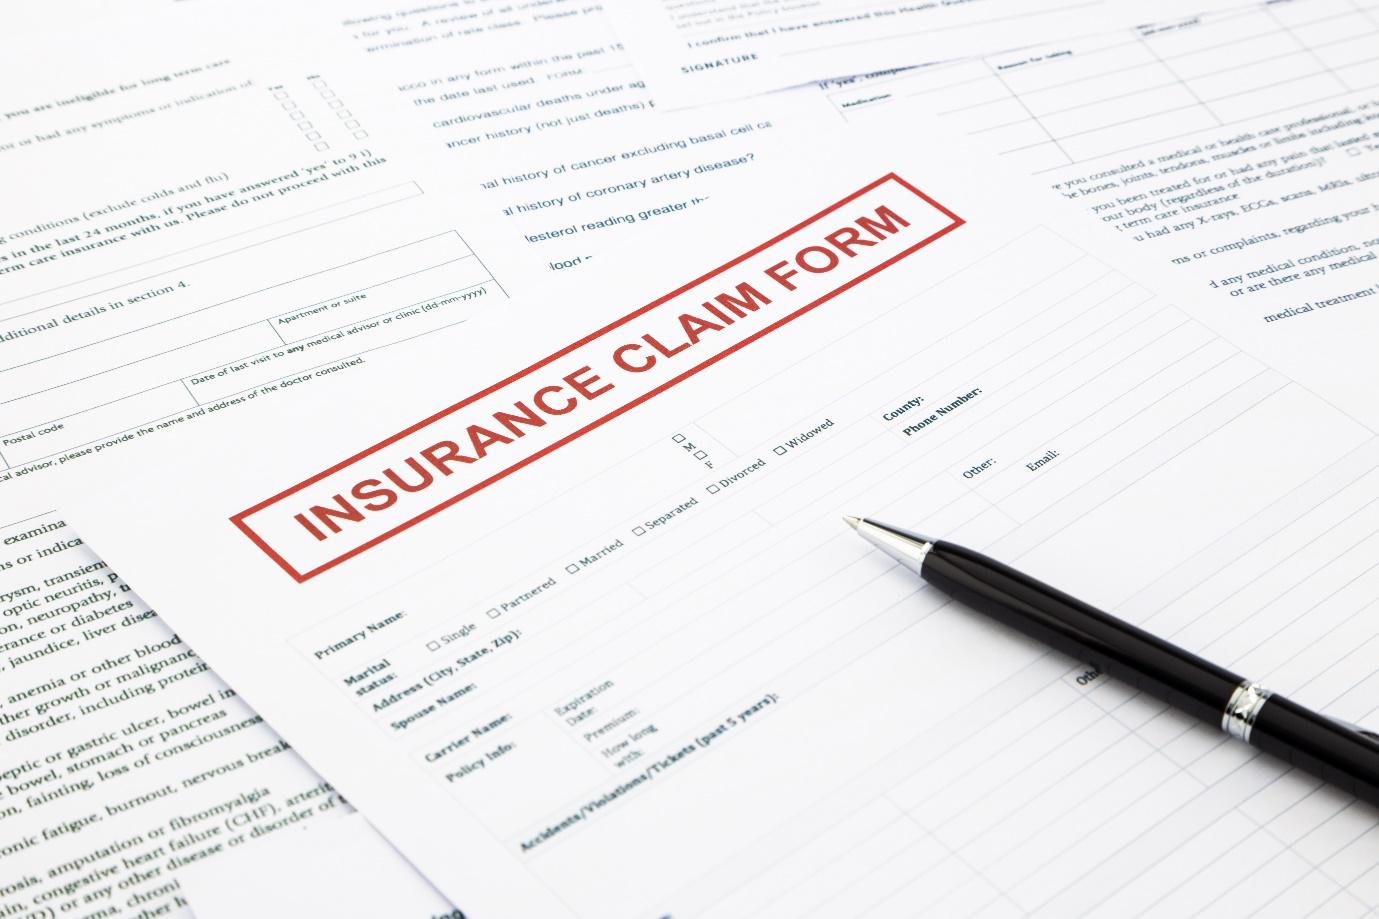 Why Should You Consider Claims Paid Ratio?